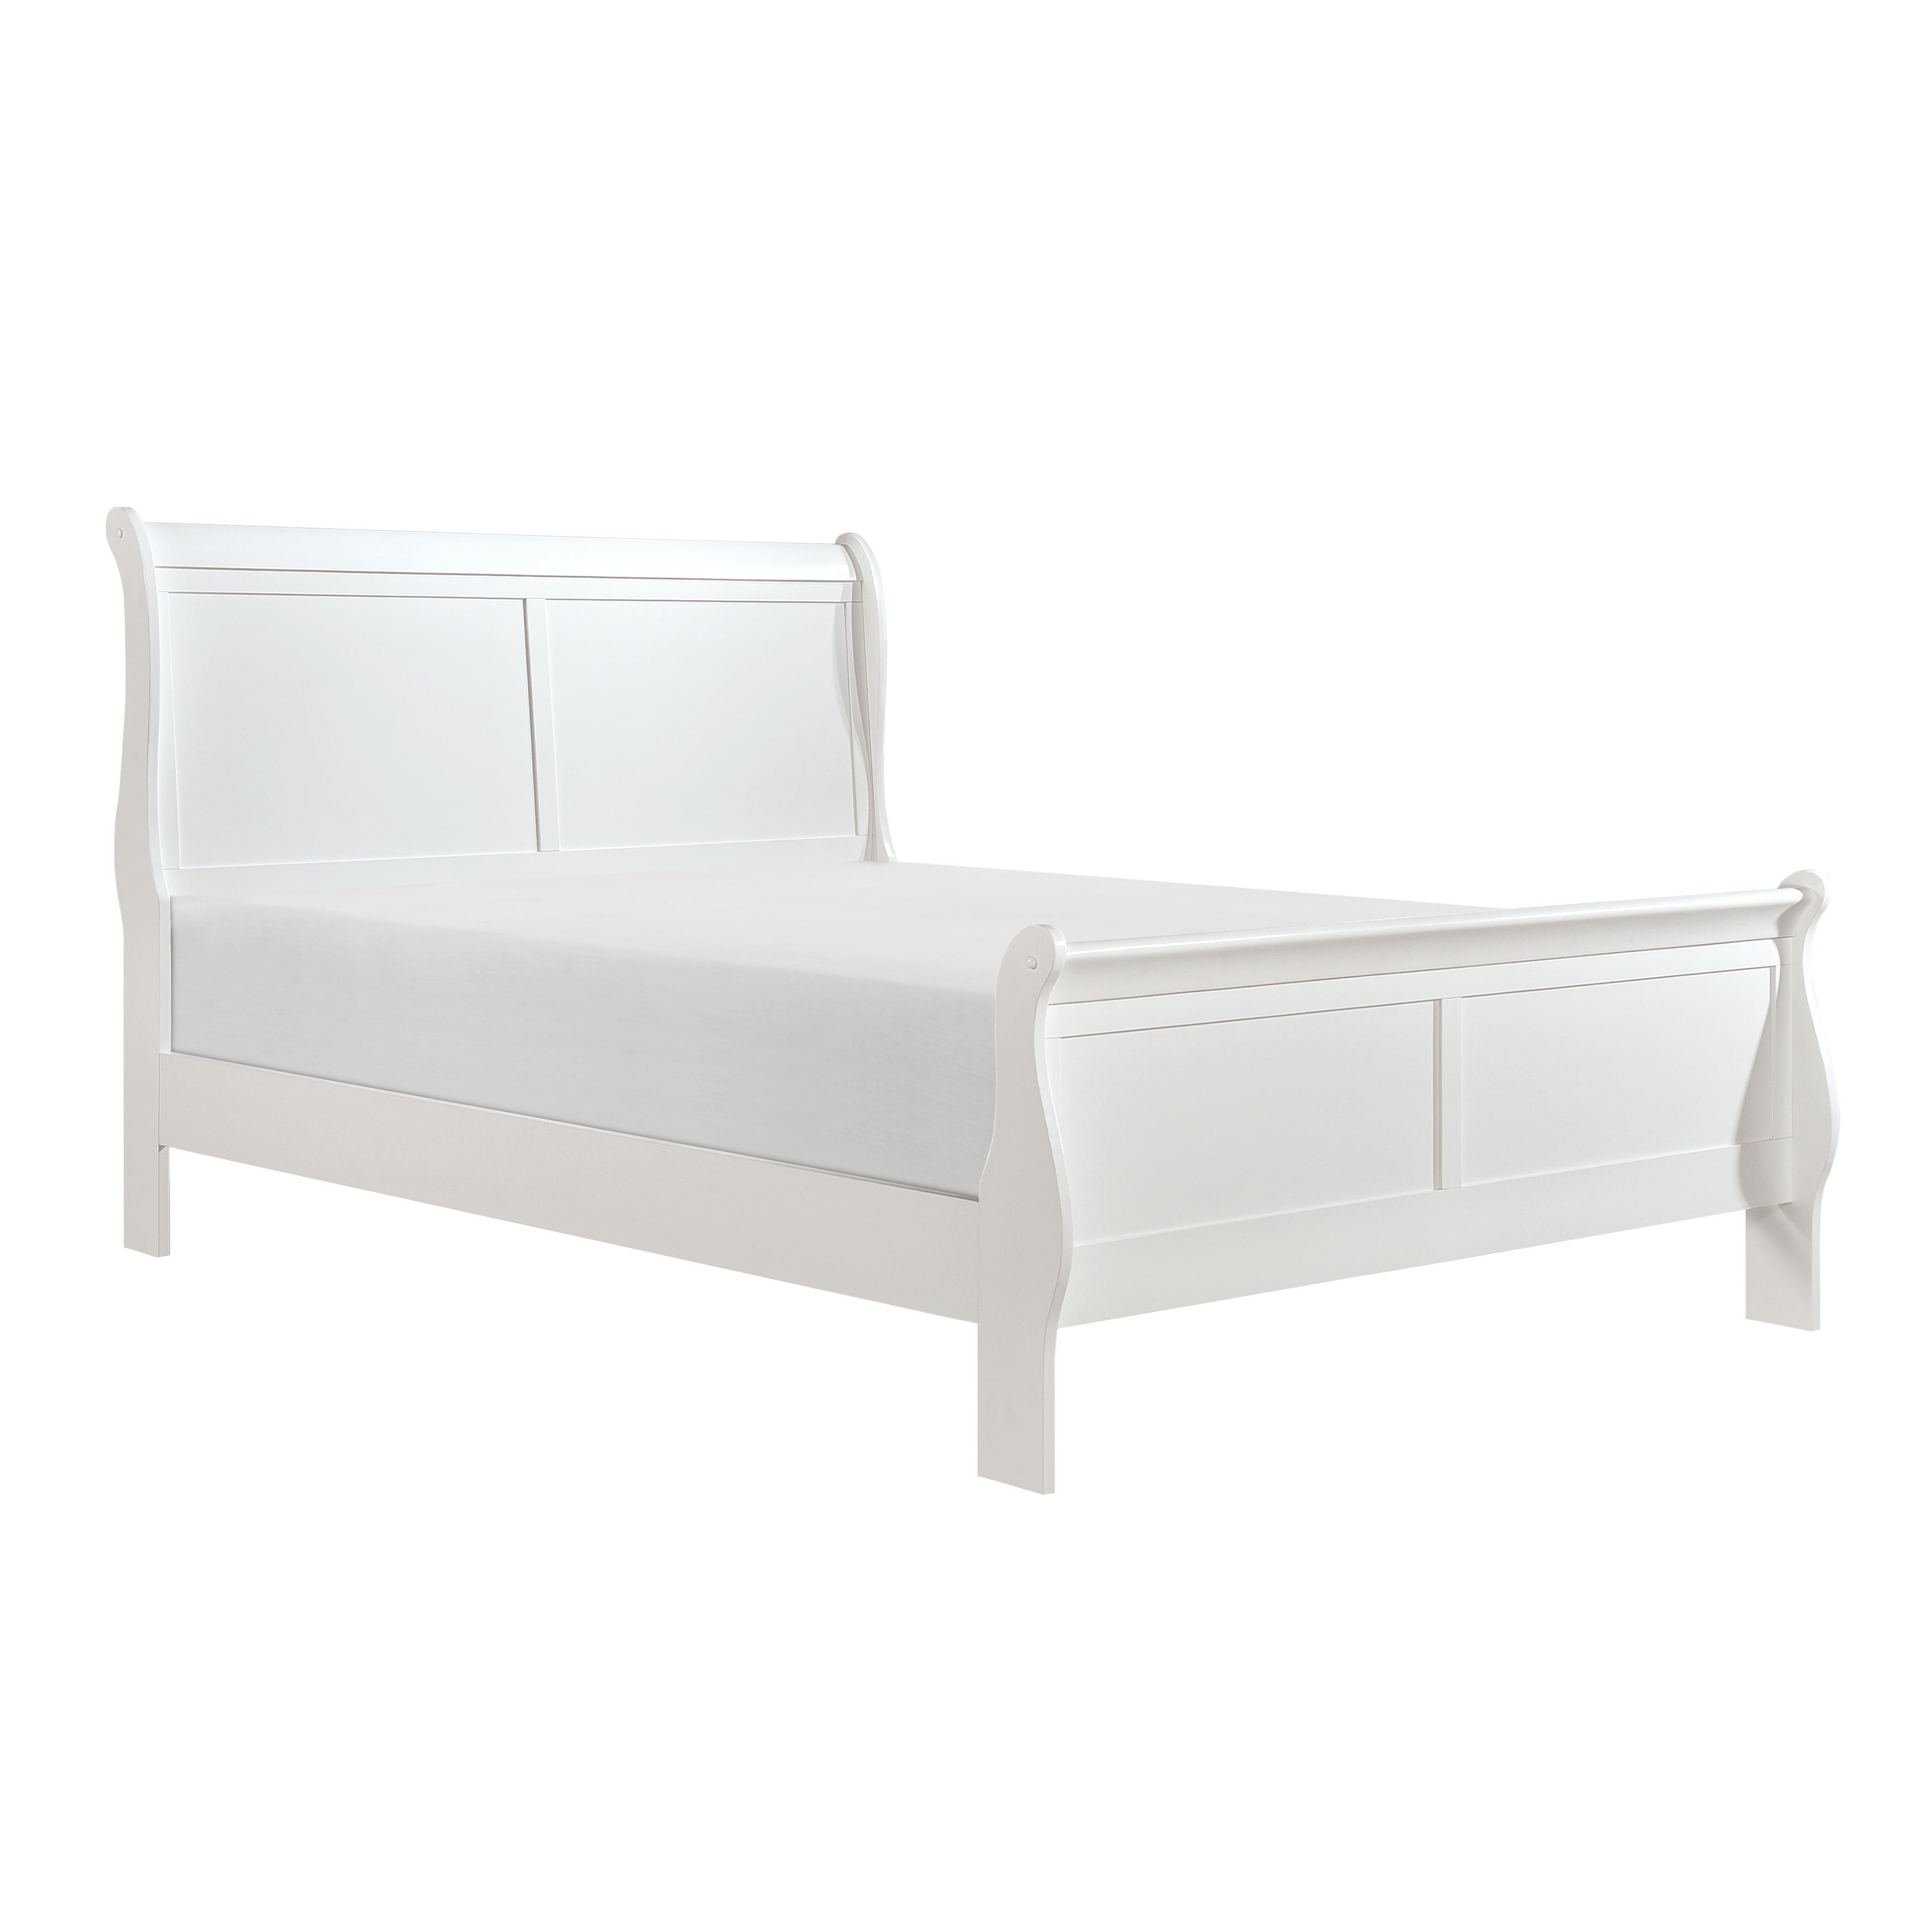 Traditional Bed 2147KW-1CK* Mayville 2147KW-1CK* in White 